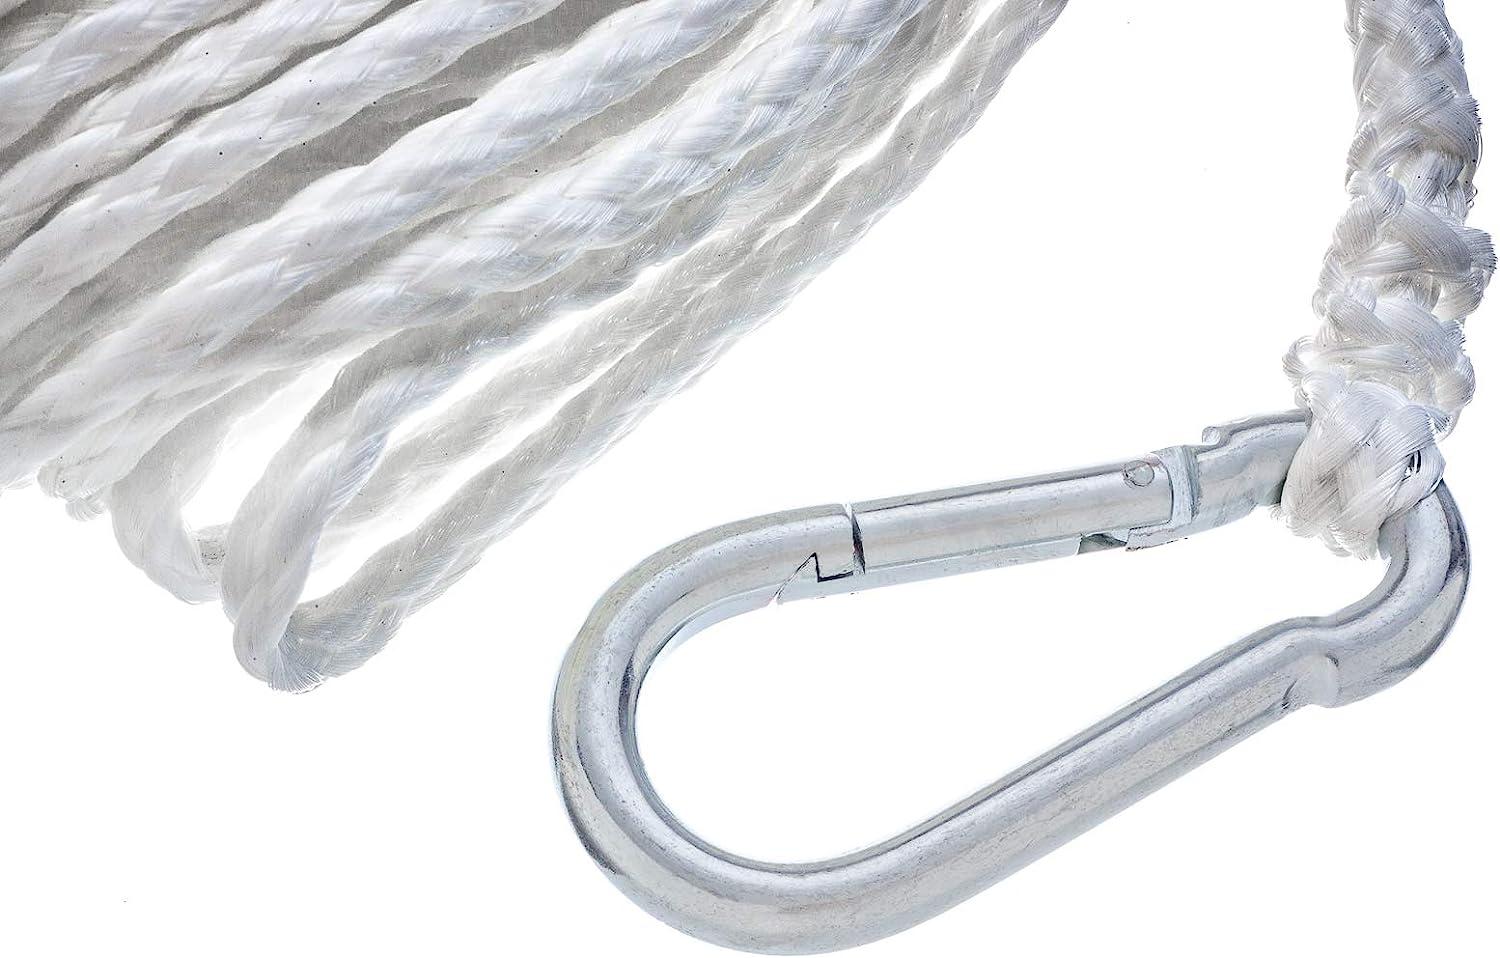 Attwood White Anchor Line 1/4 in x 50 ft